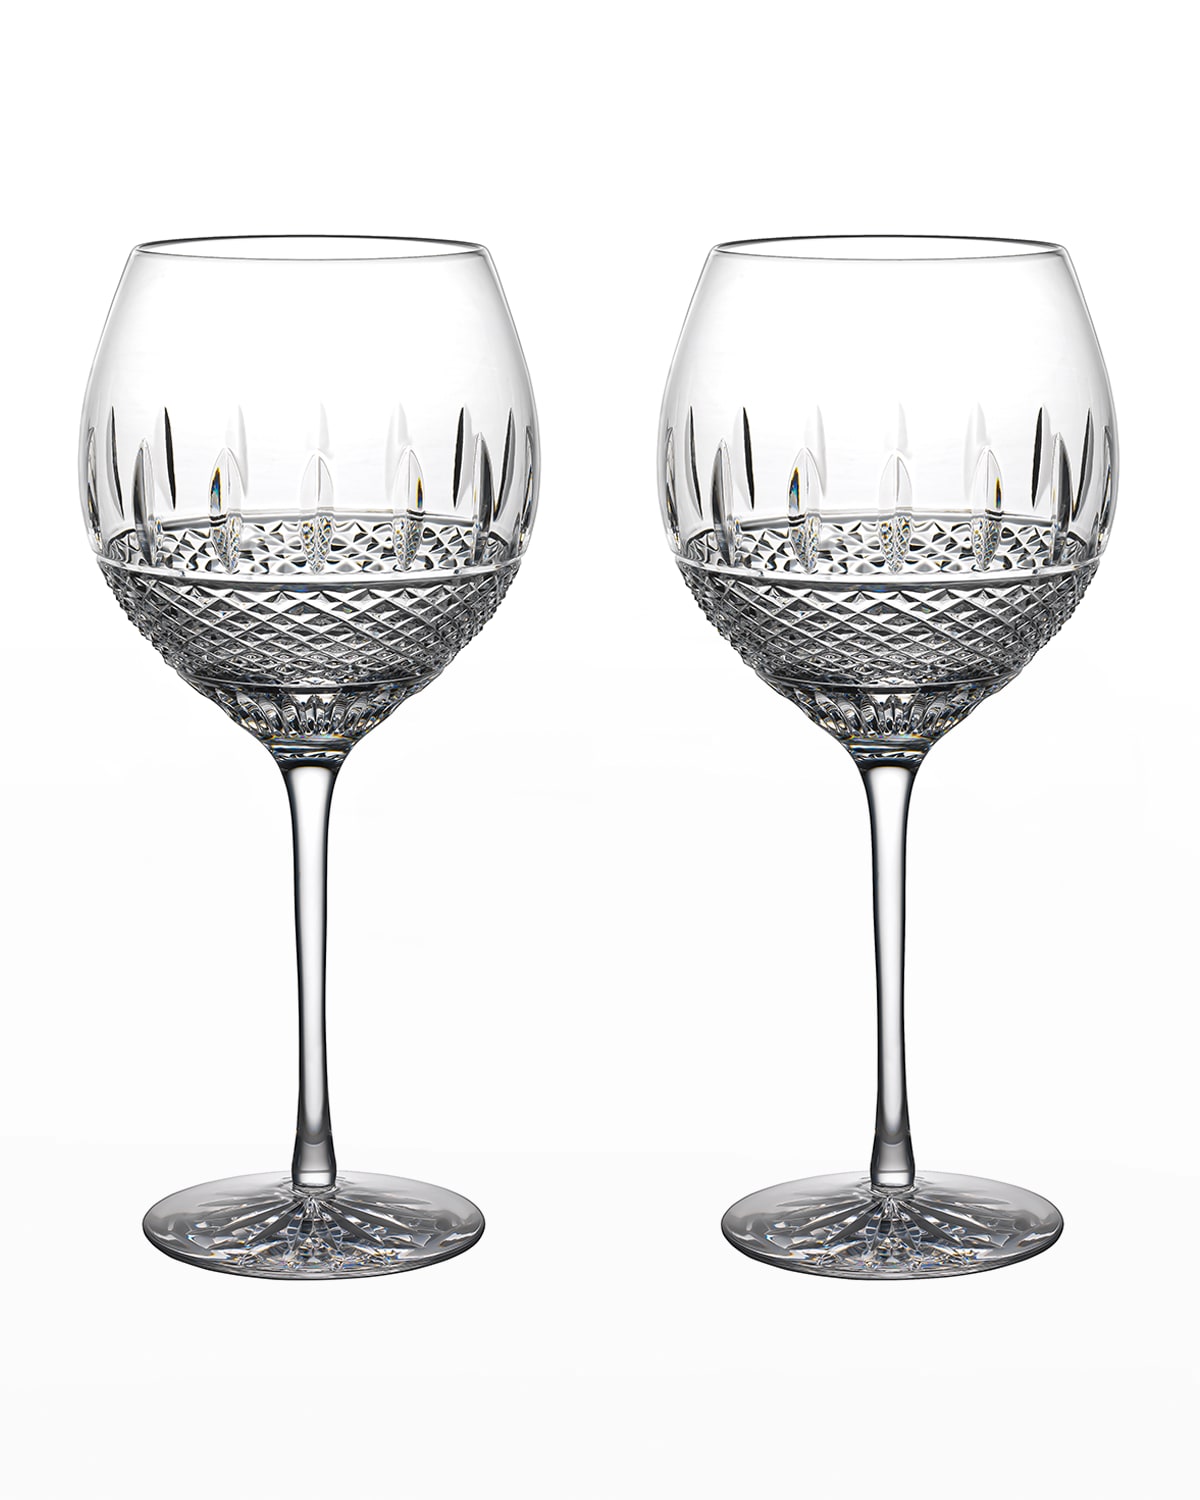 Custom Monogram Stemmed Wine Glass Gifts for the Bride by Kim Stealey